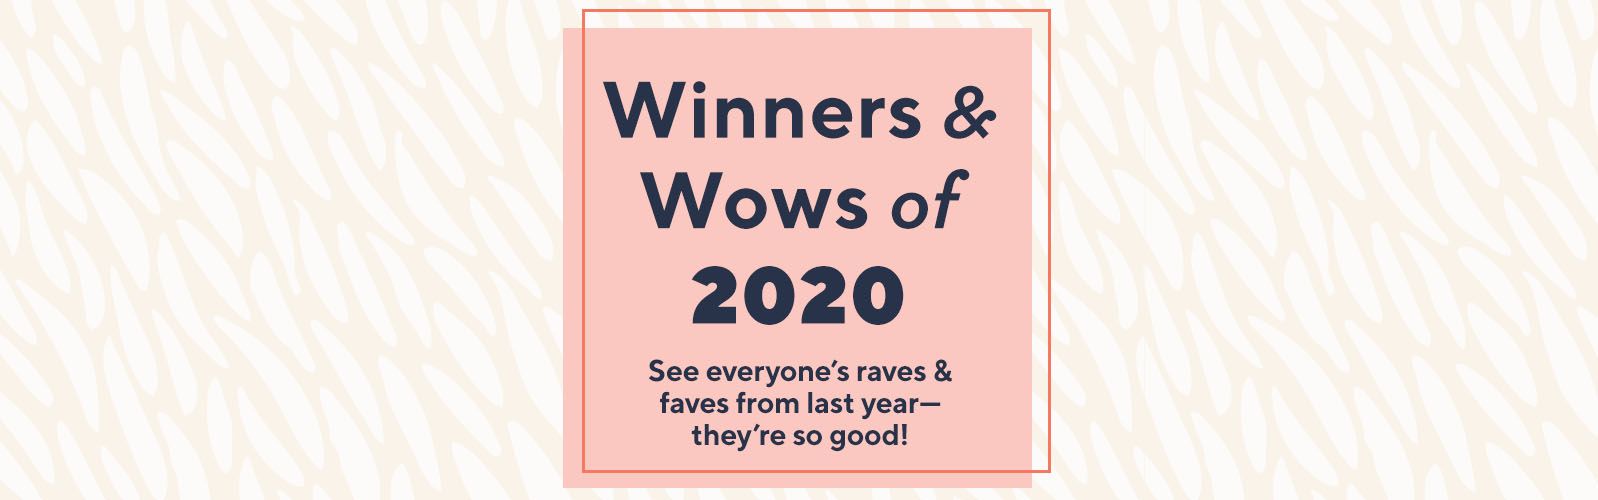 Winners & Wows of 2020. See everyone’s raves & faves from last year—they're so good!